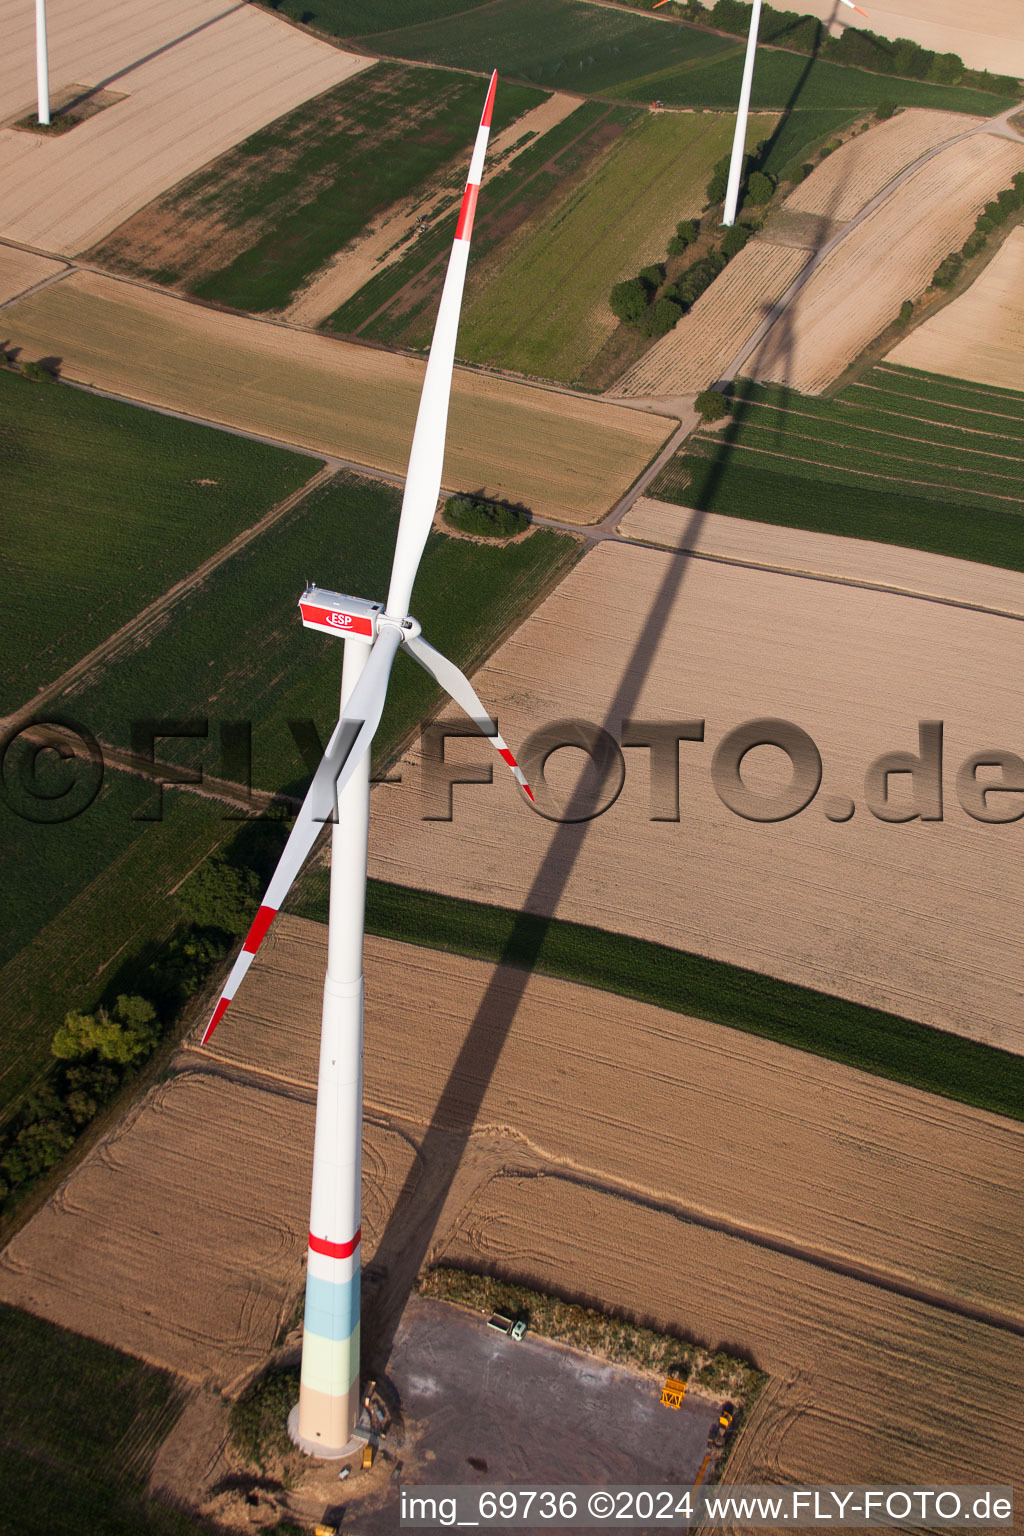 Wind farm construction in Offenbach an der Queich in the state Rhineland-Palatinate, Germany seen from a drone